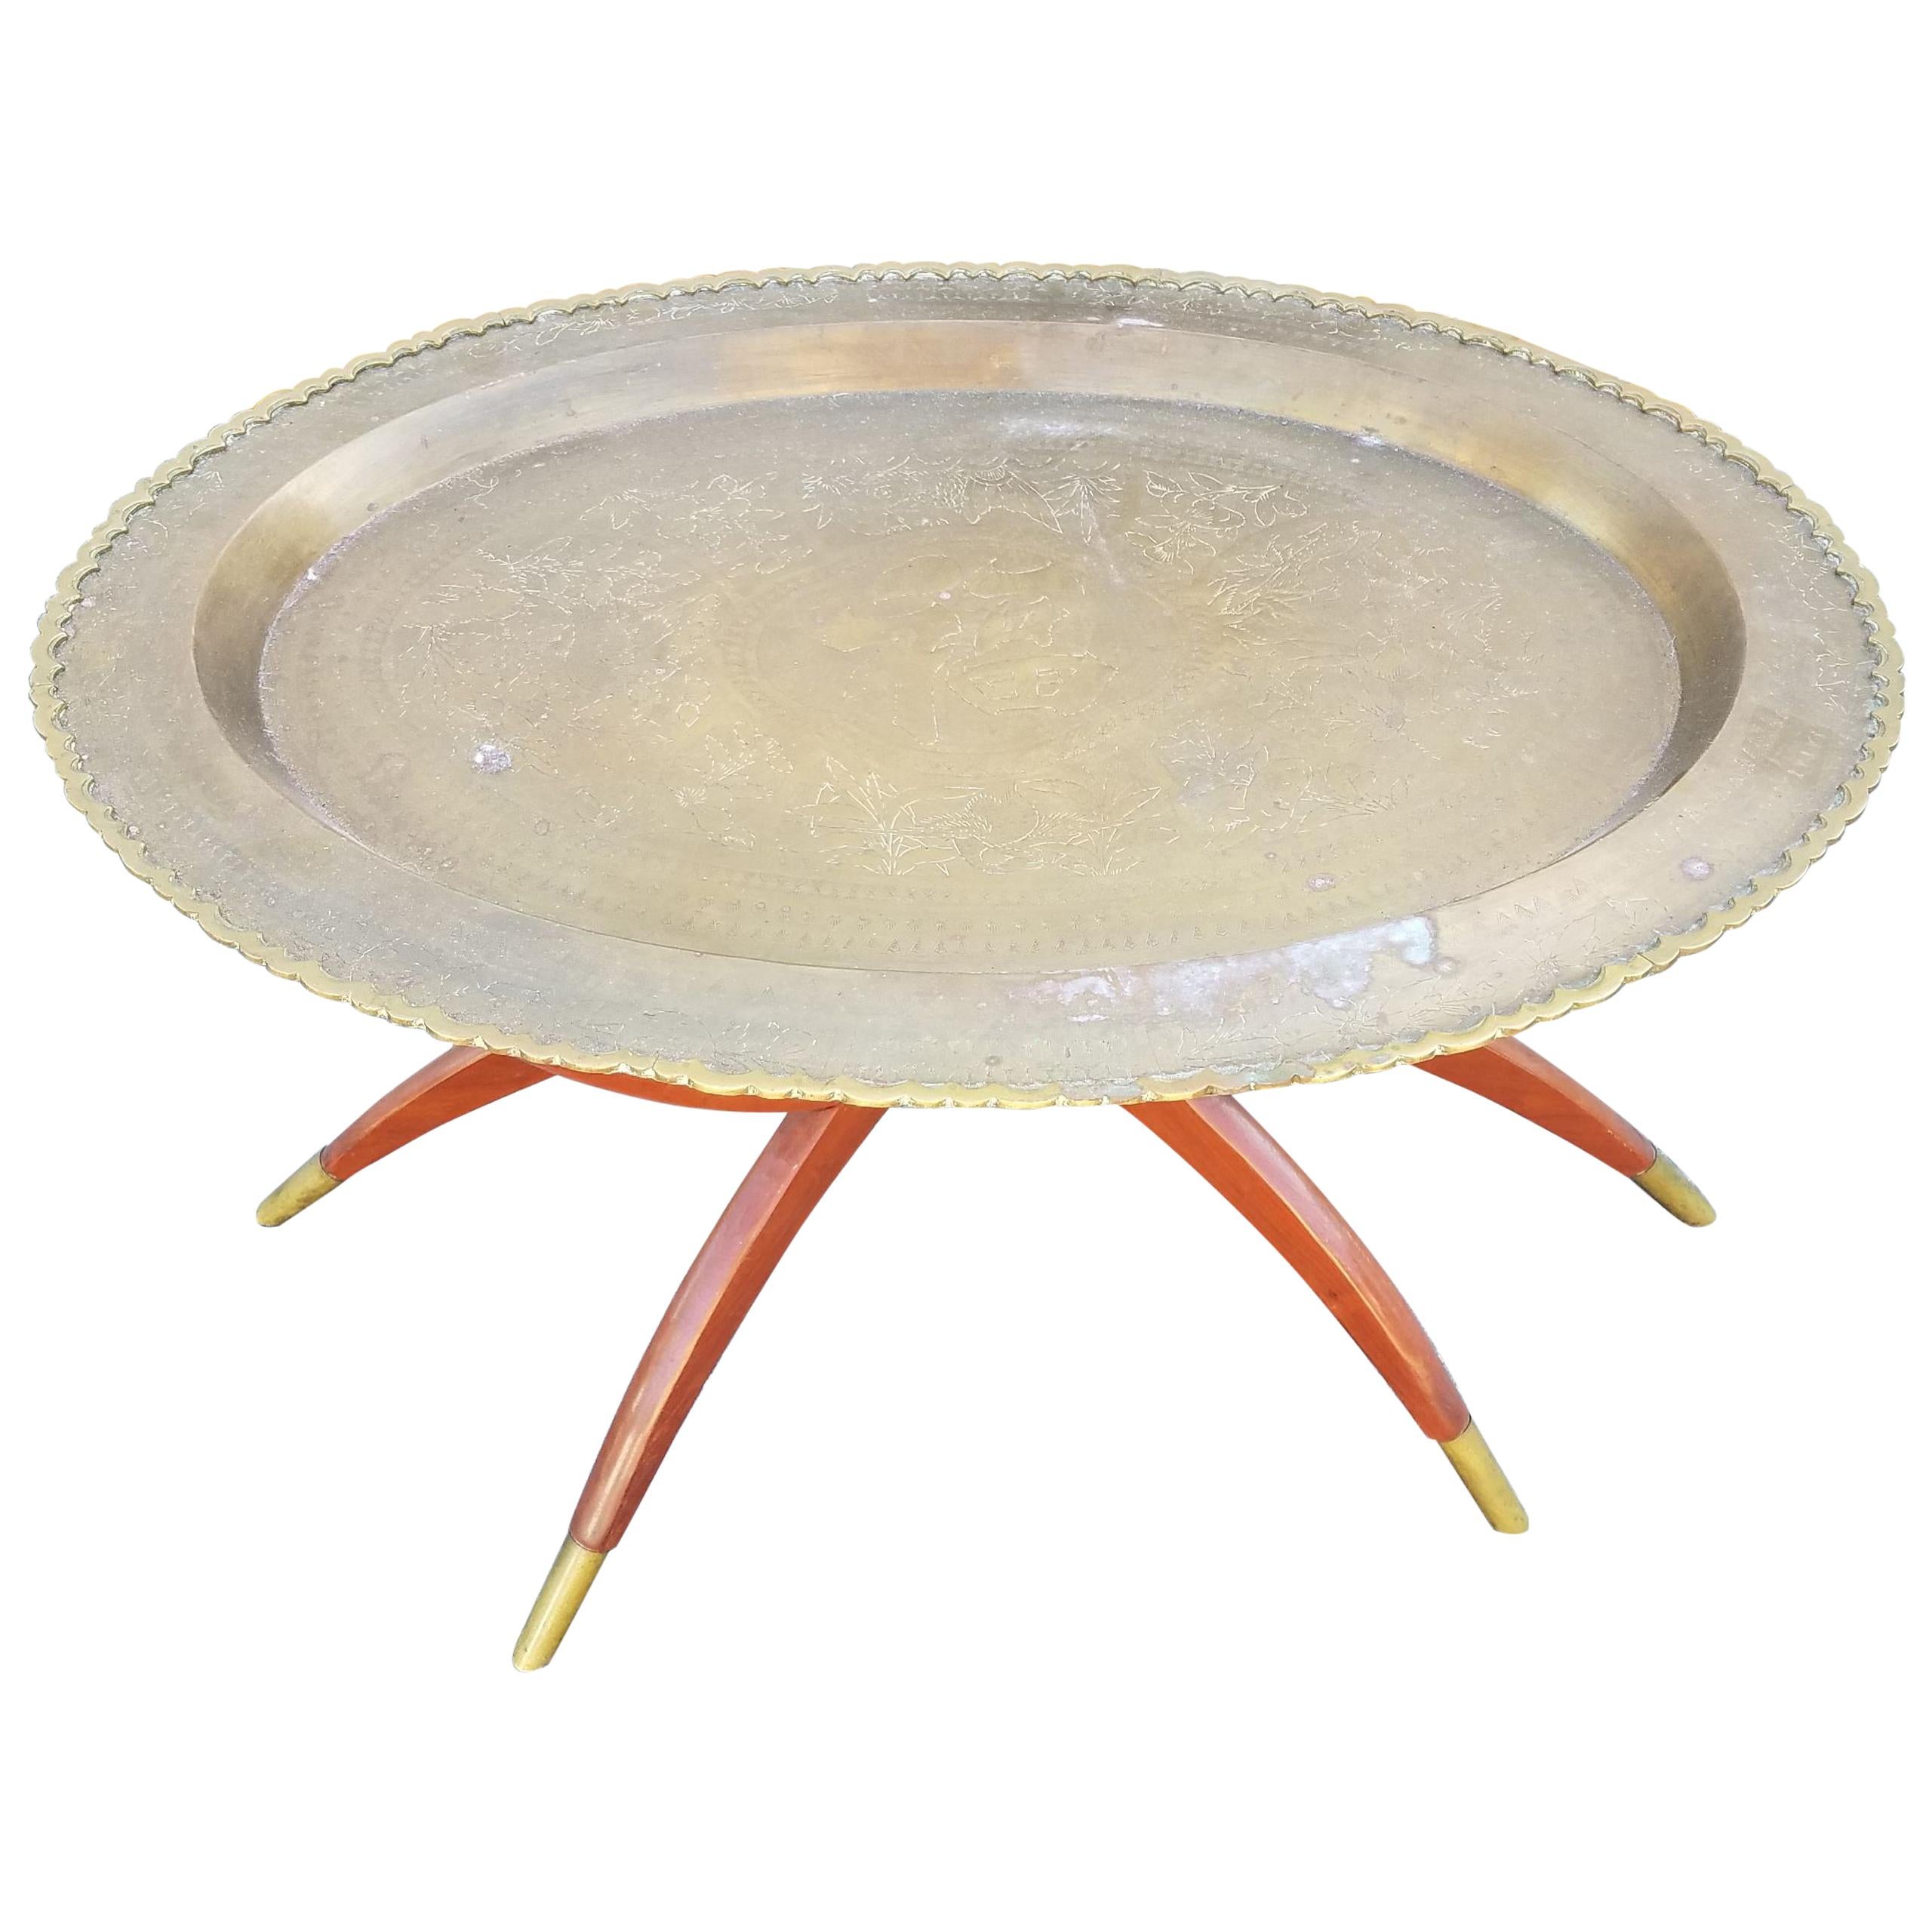 Moroccan Copper Coffee Table, Oval with Wooden Folding Base